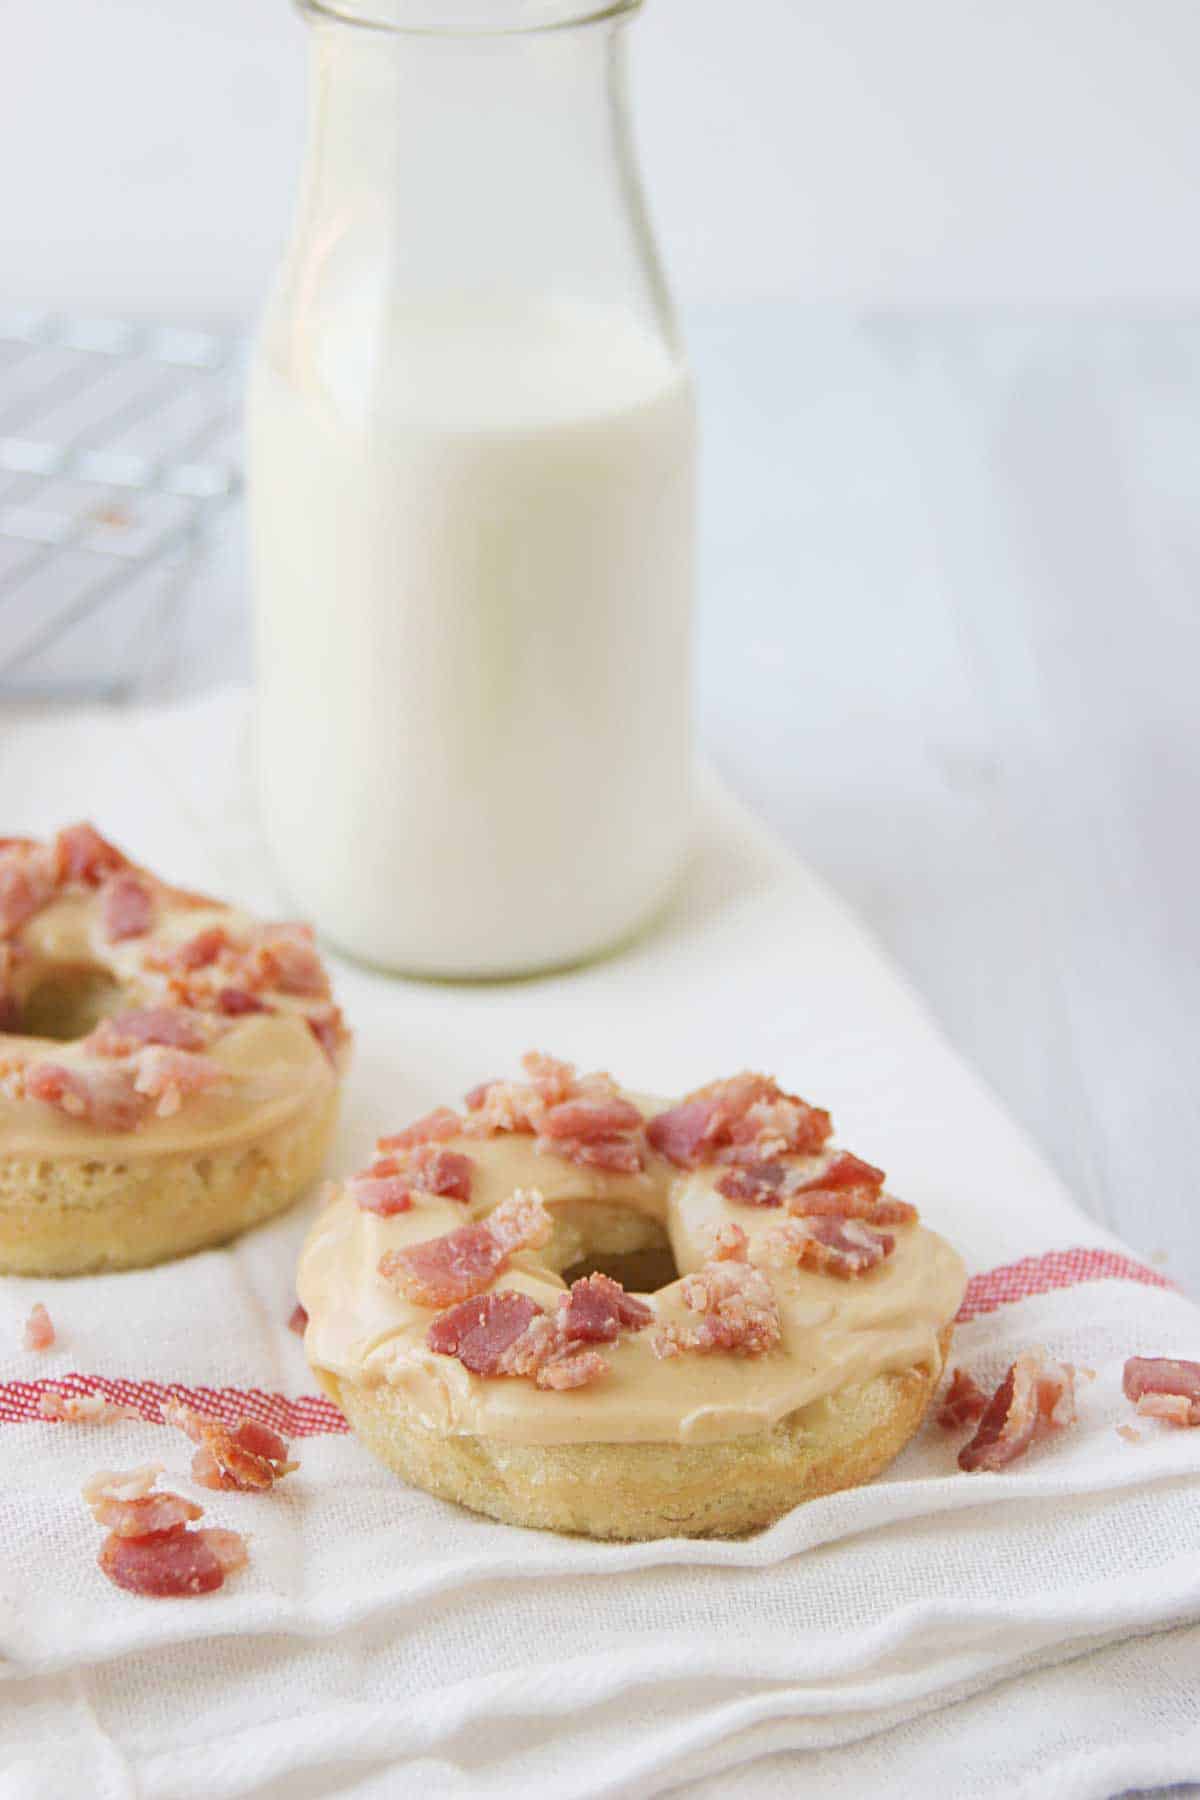 Banana Baked Donuts with Peanut Butter and Bacon with milk behind